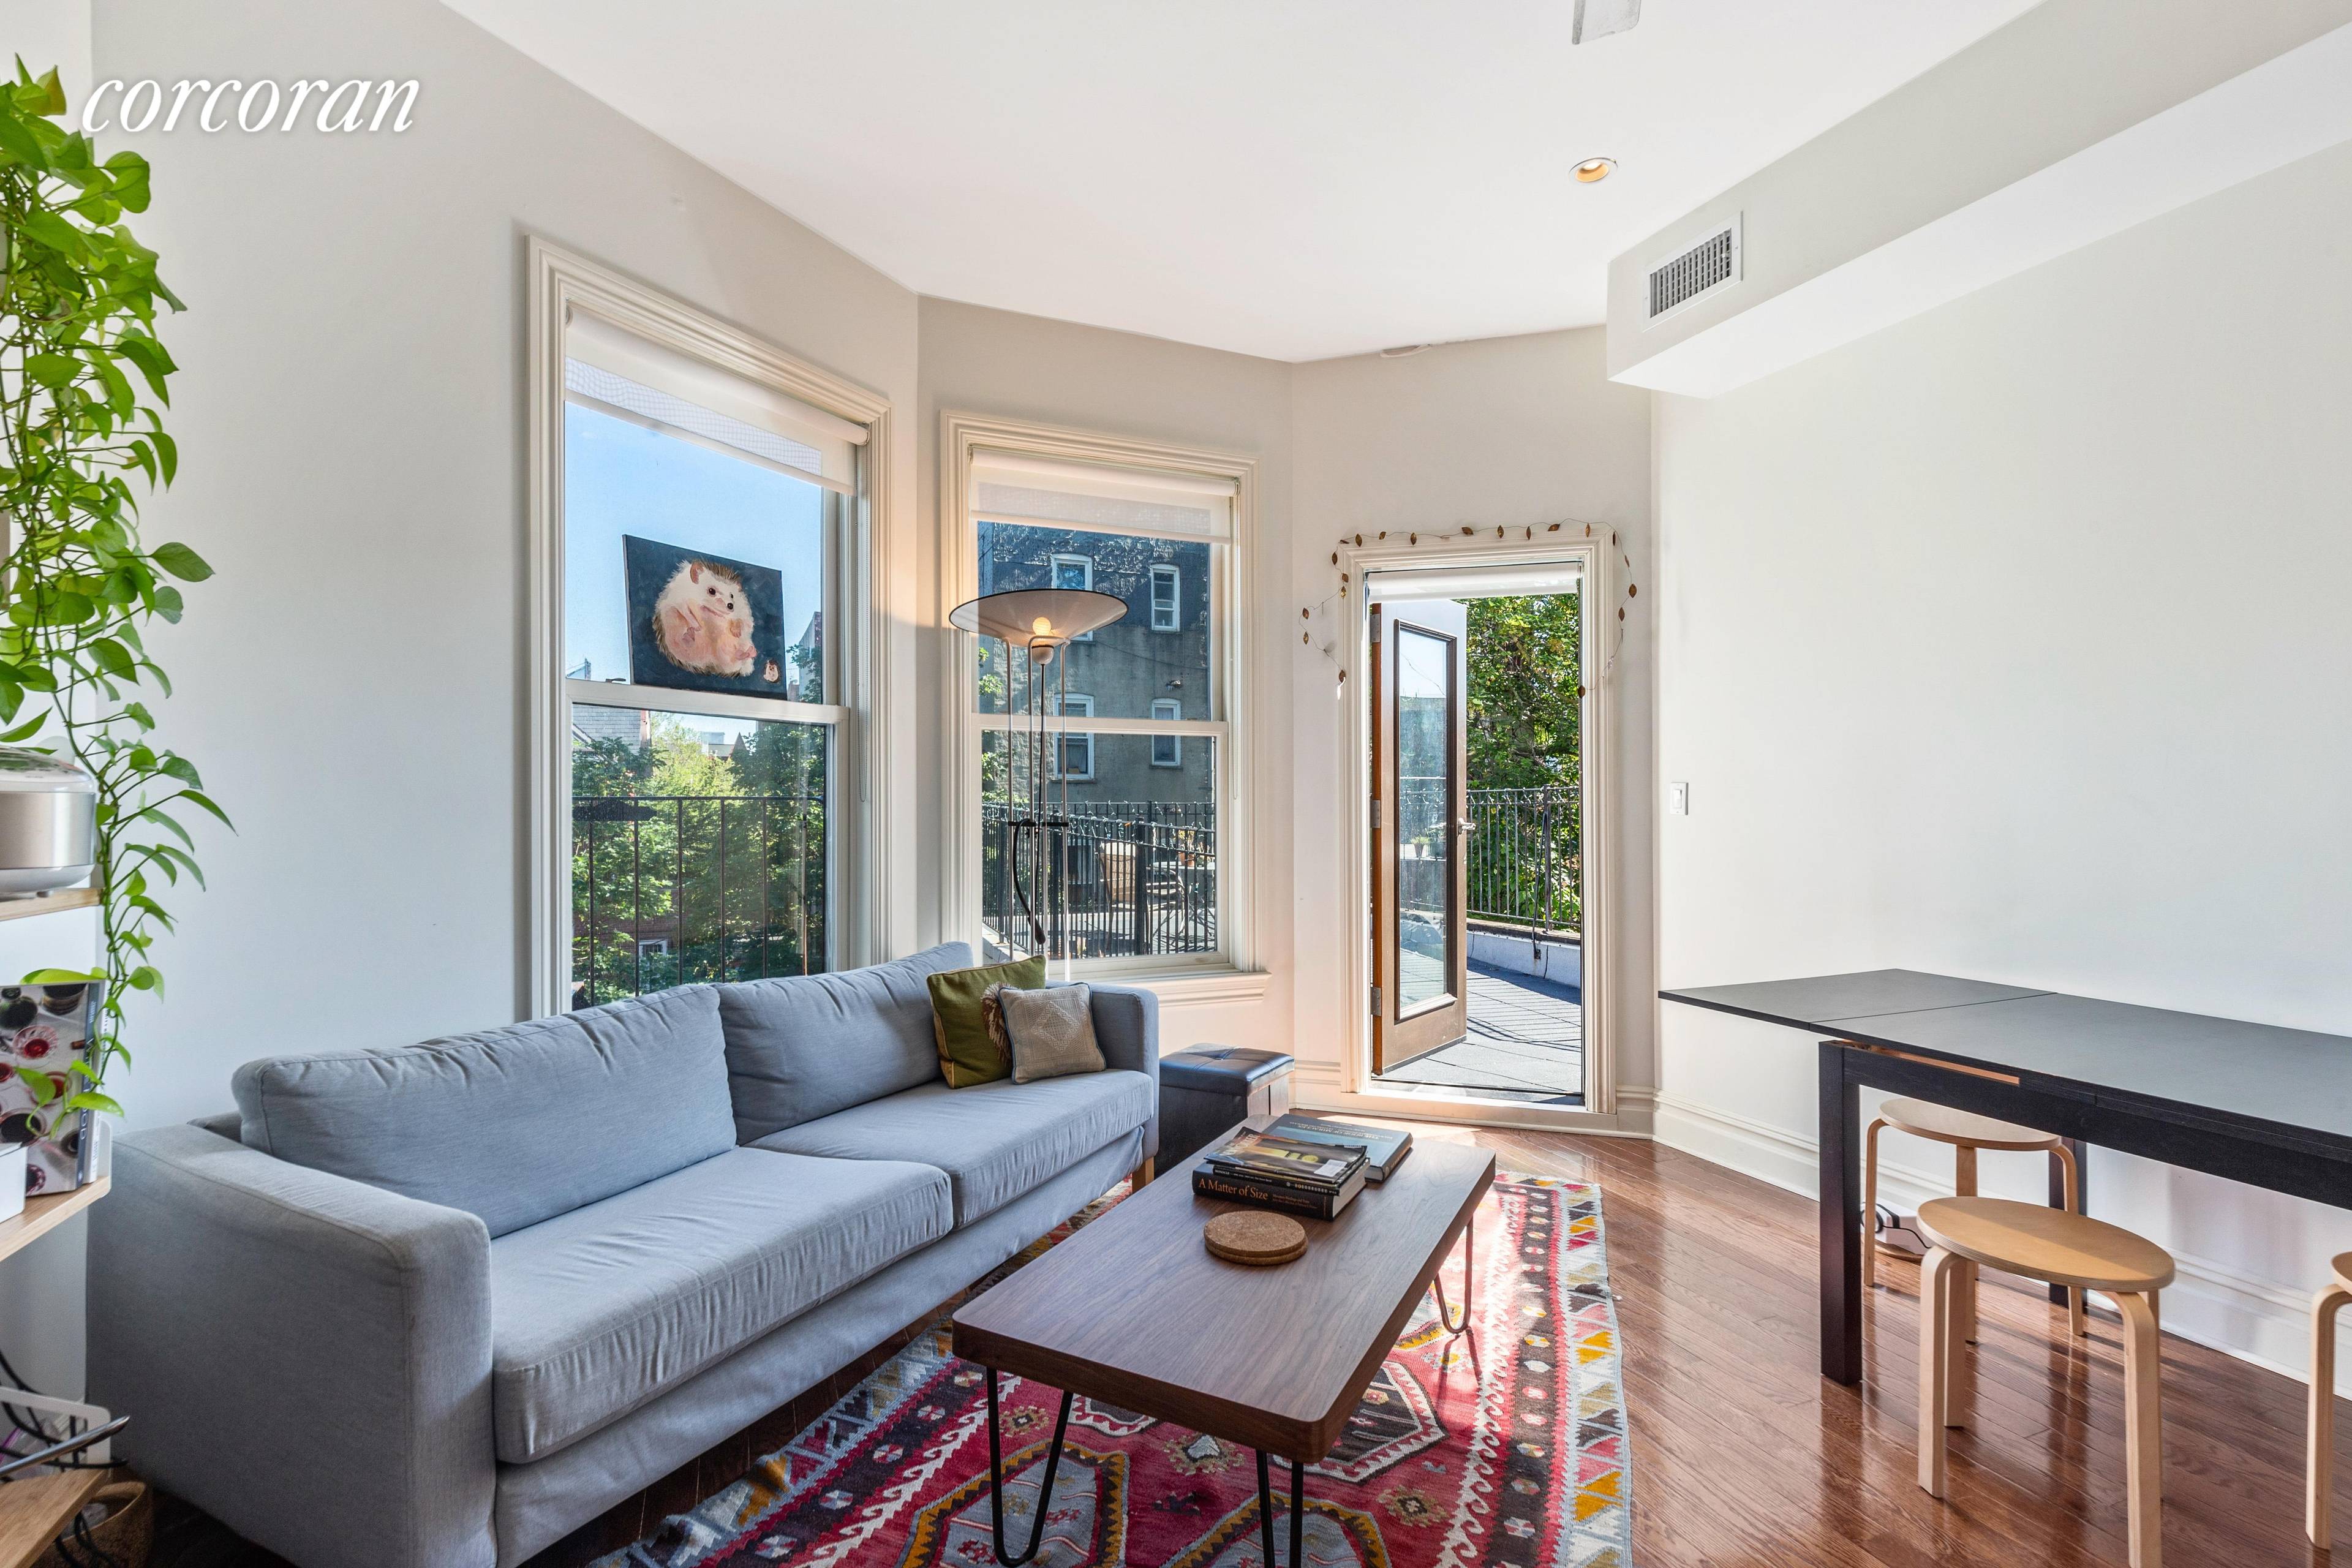 Amazing renovation on a beautiful tree lined block with HUGE PRIVATE OUTDOOR SPACE, it's the modernized brownstone rental you have been searching for !